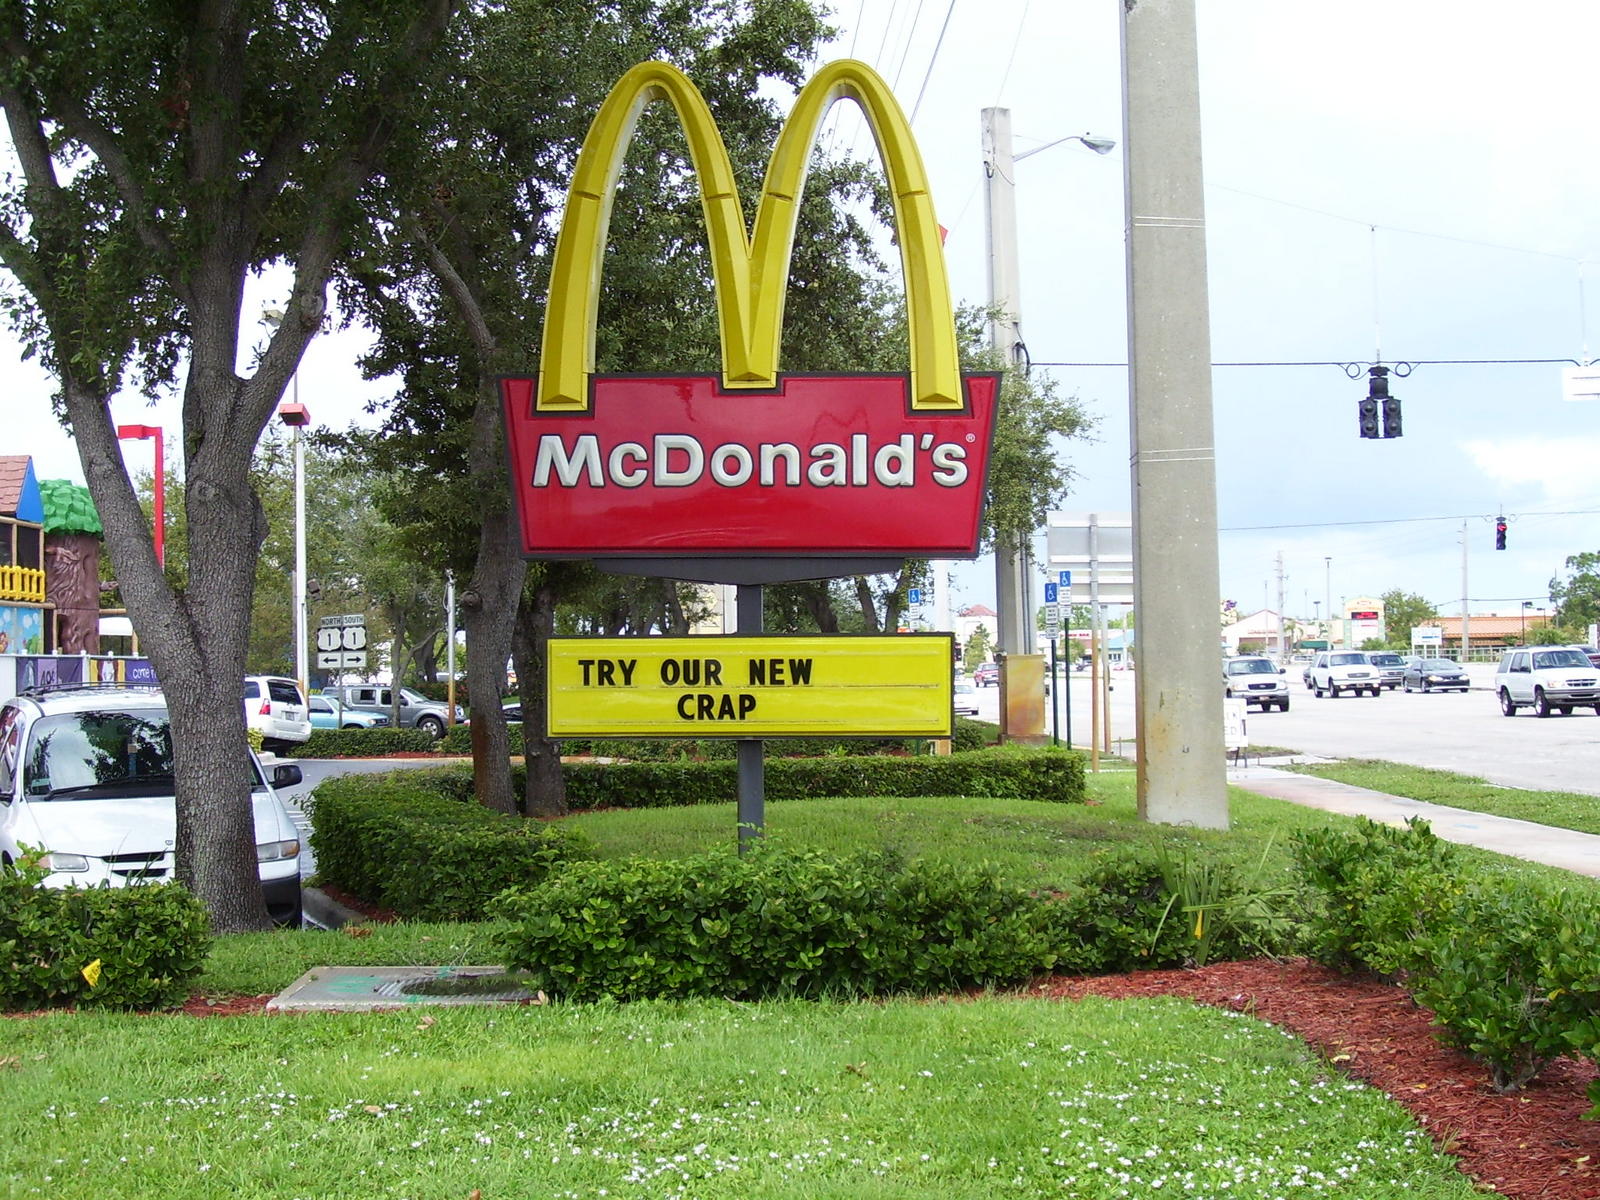 funny mcdonalds signs - McDonald's Try Our New Crap